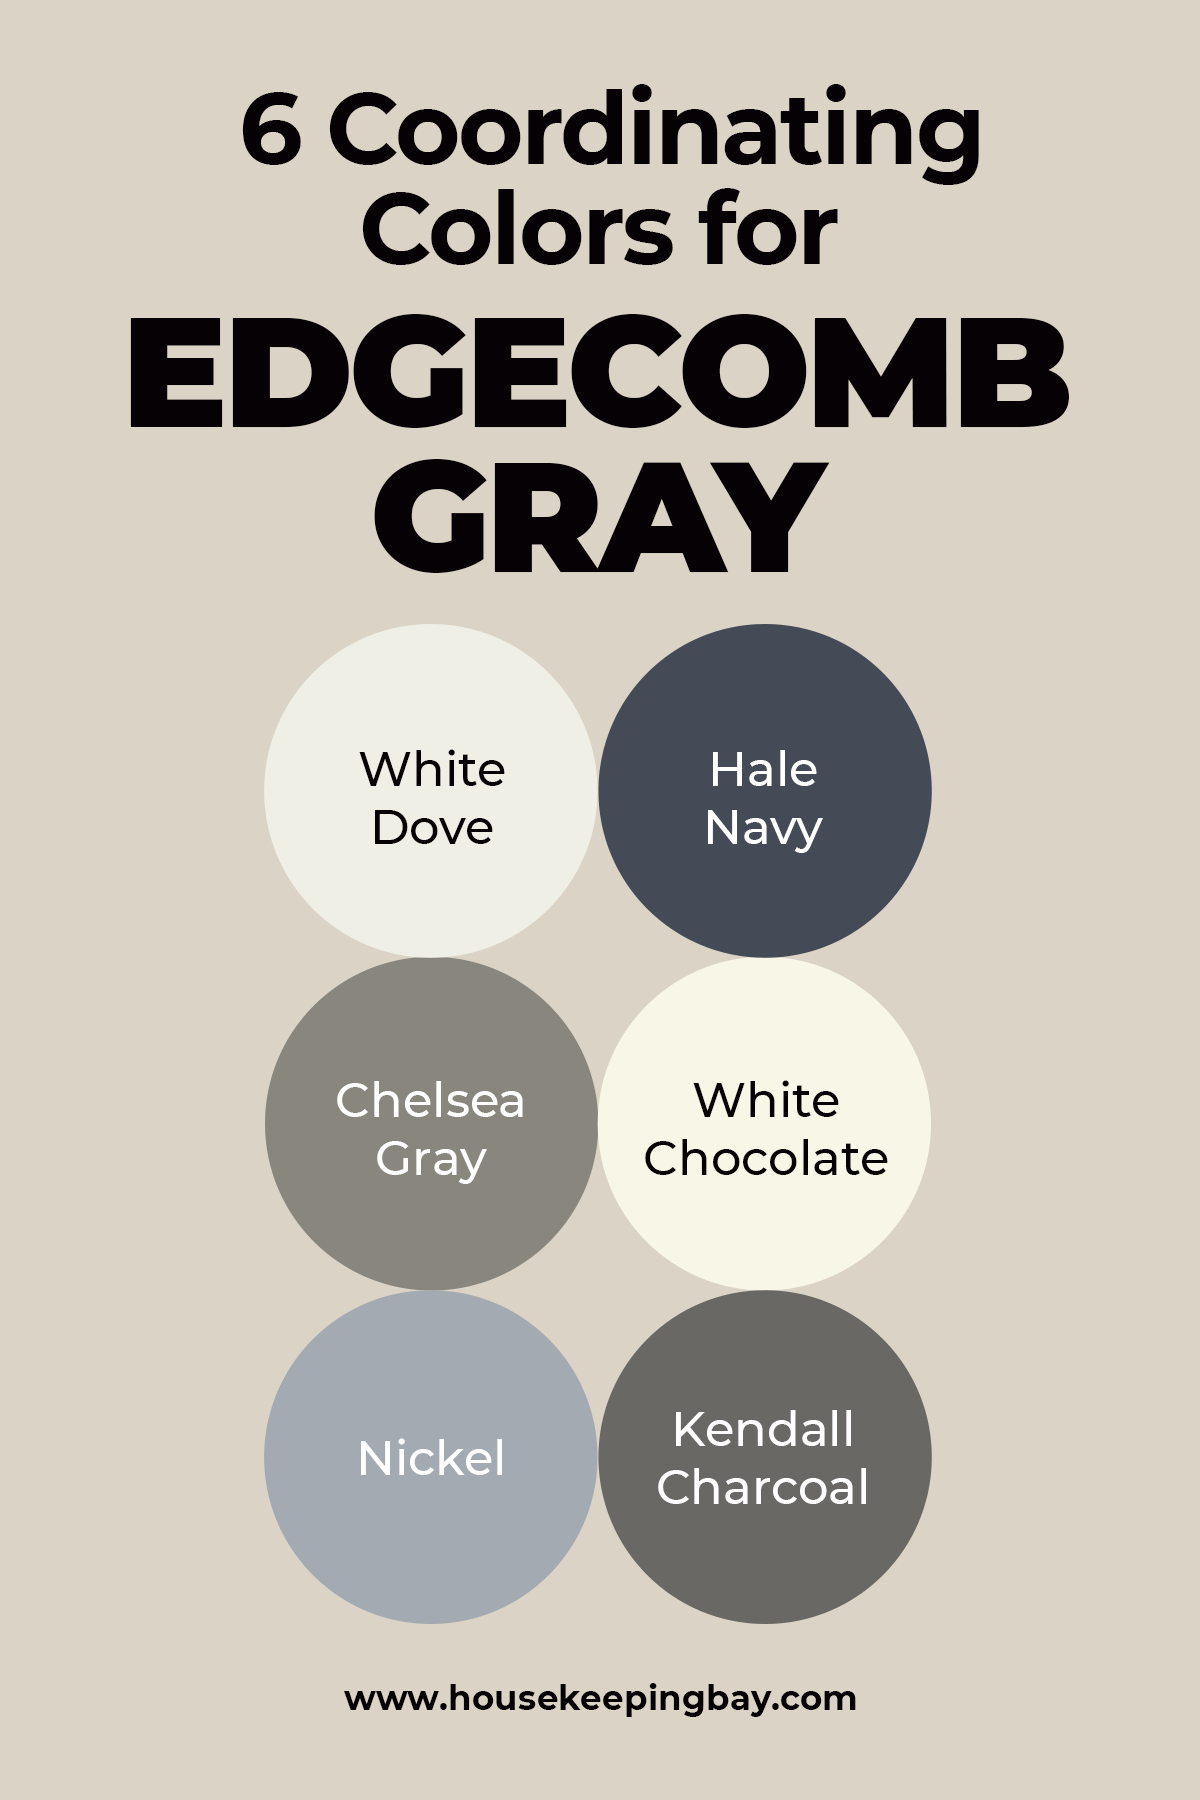 6 Coordinating Colors for Edgecomb Gray